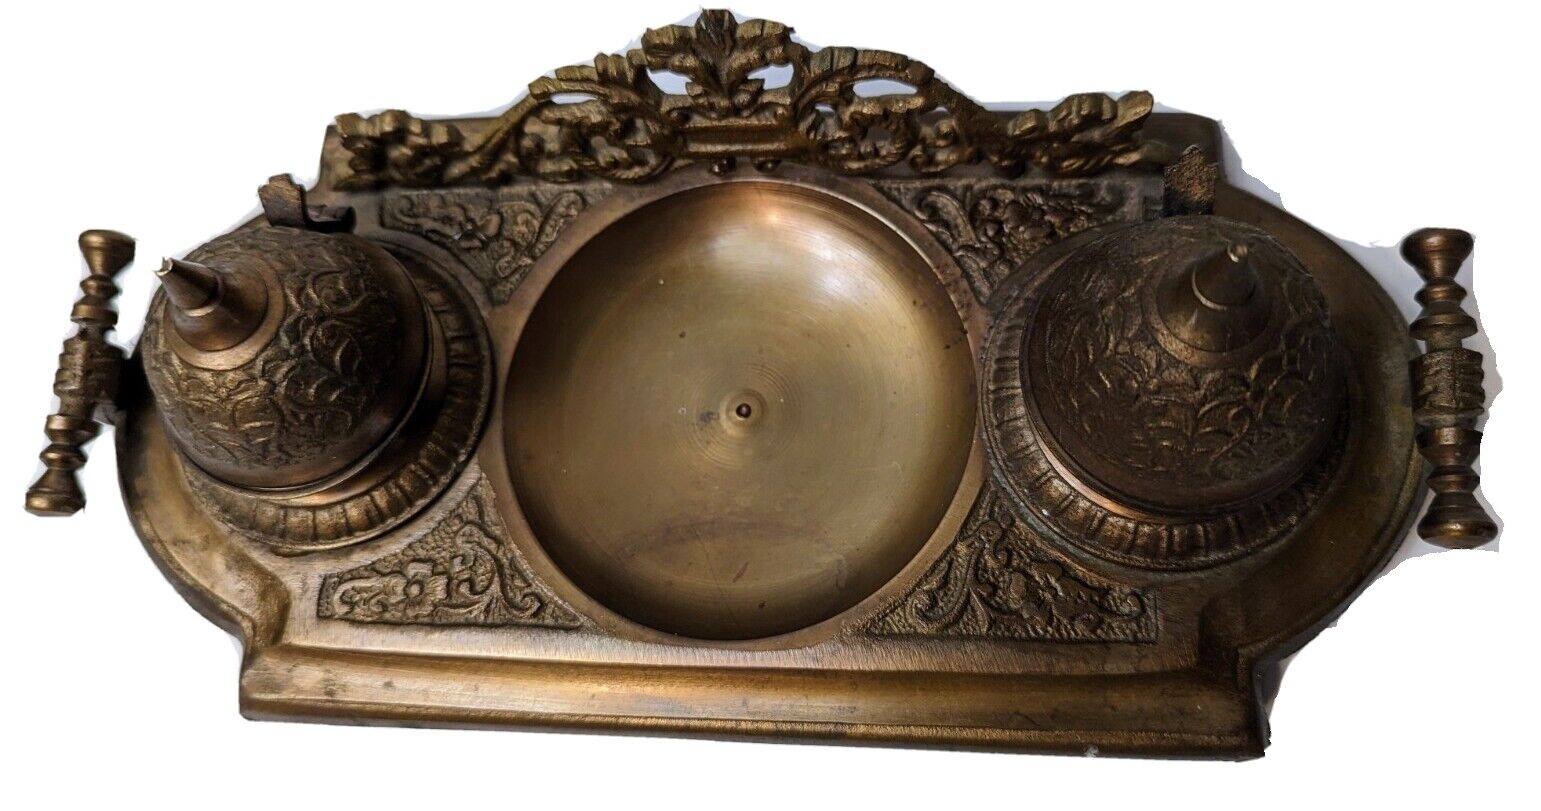 Impressive Antique French Imperial footed Brass Inkwell 